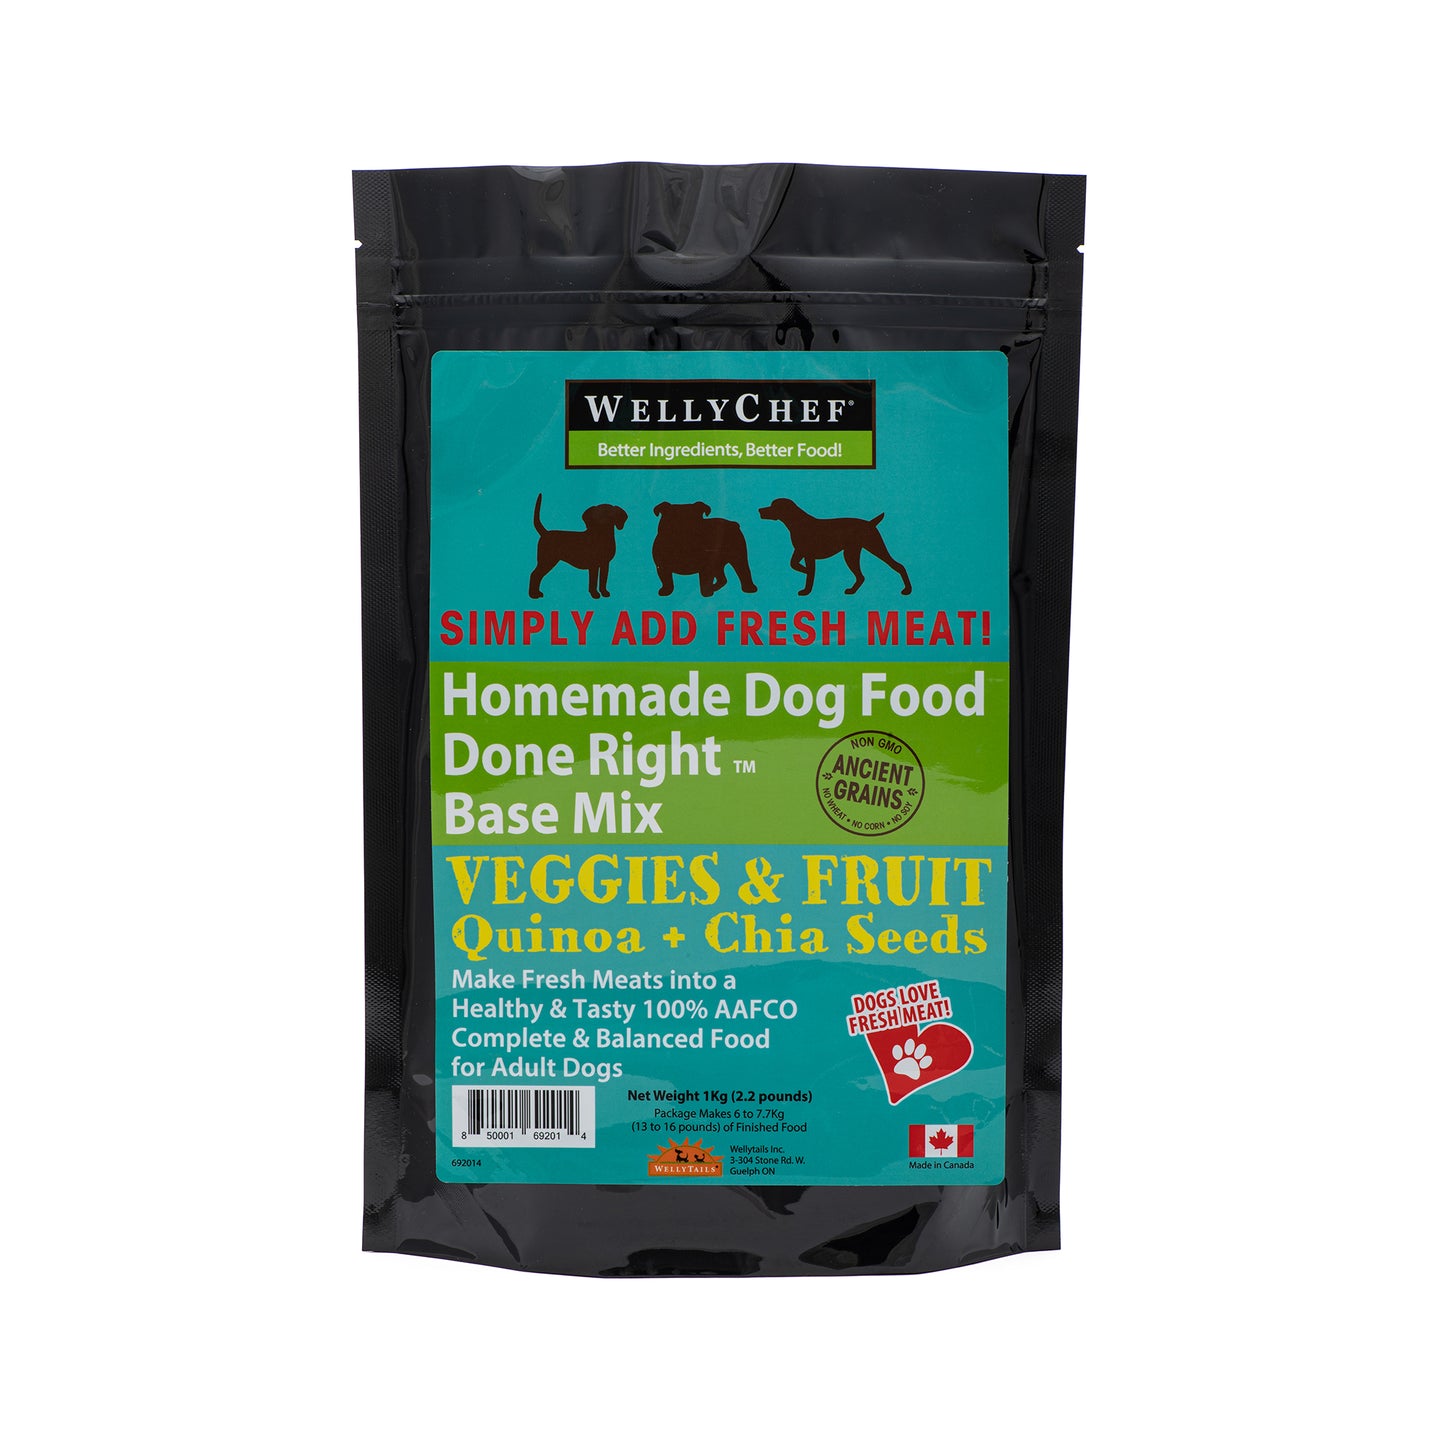 WellyChefTM  "Homemade Dog Food Done Right"TM BASE MIX